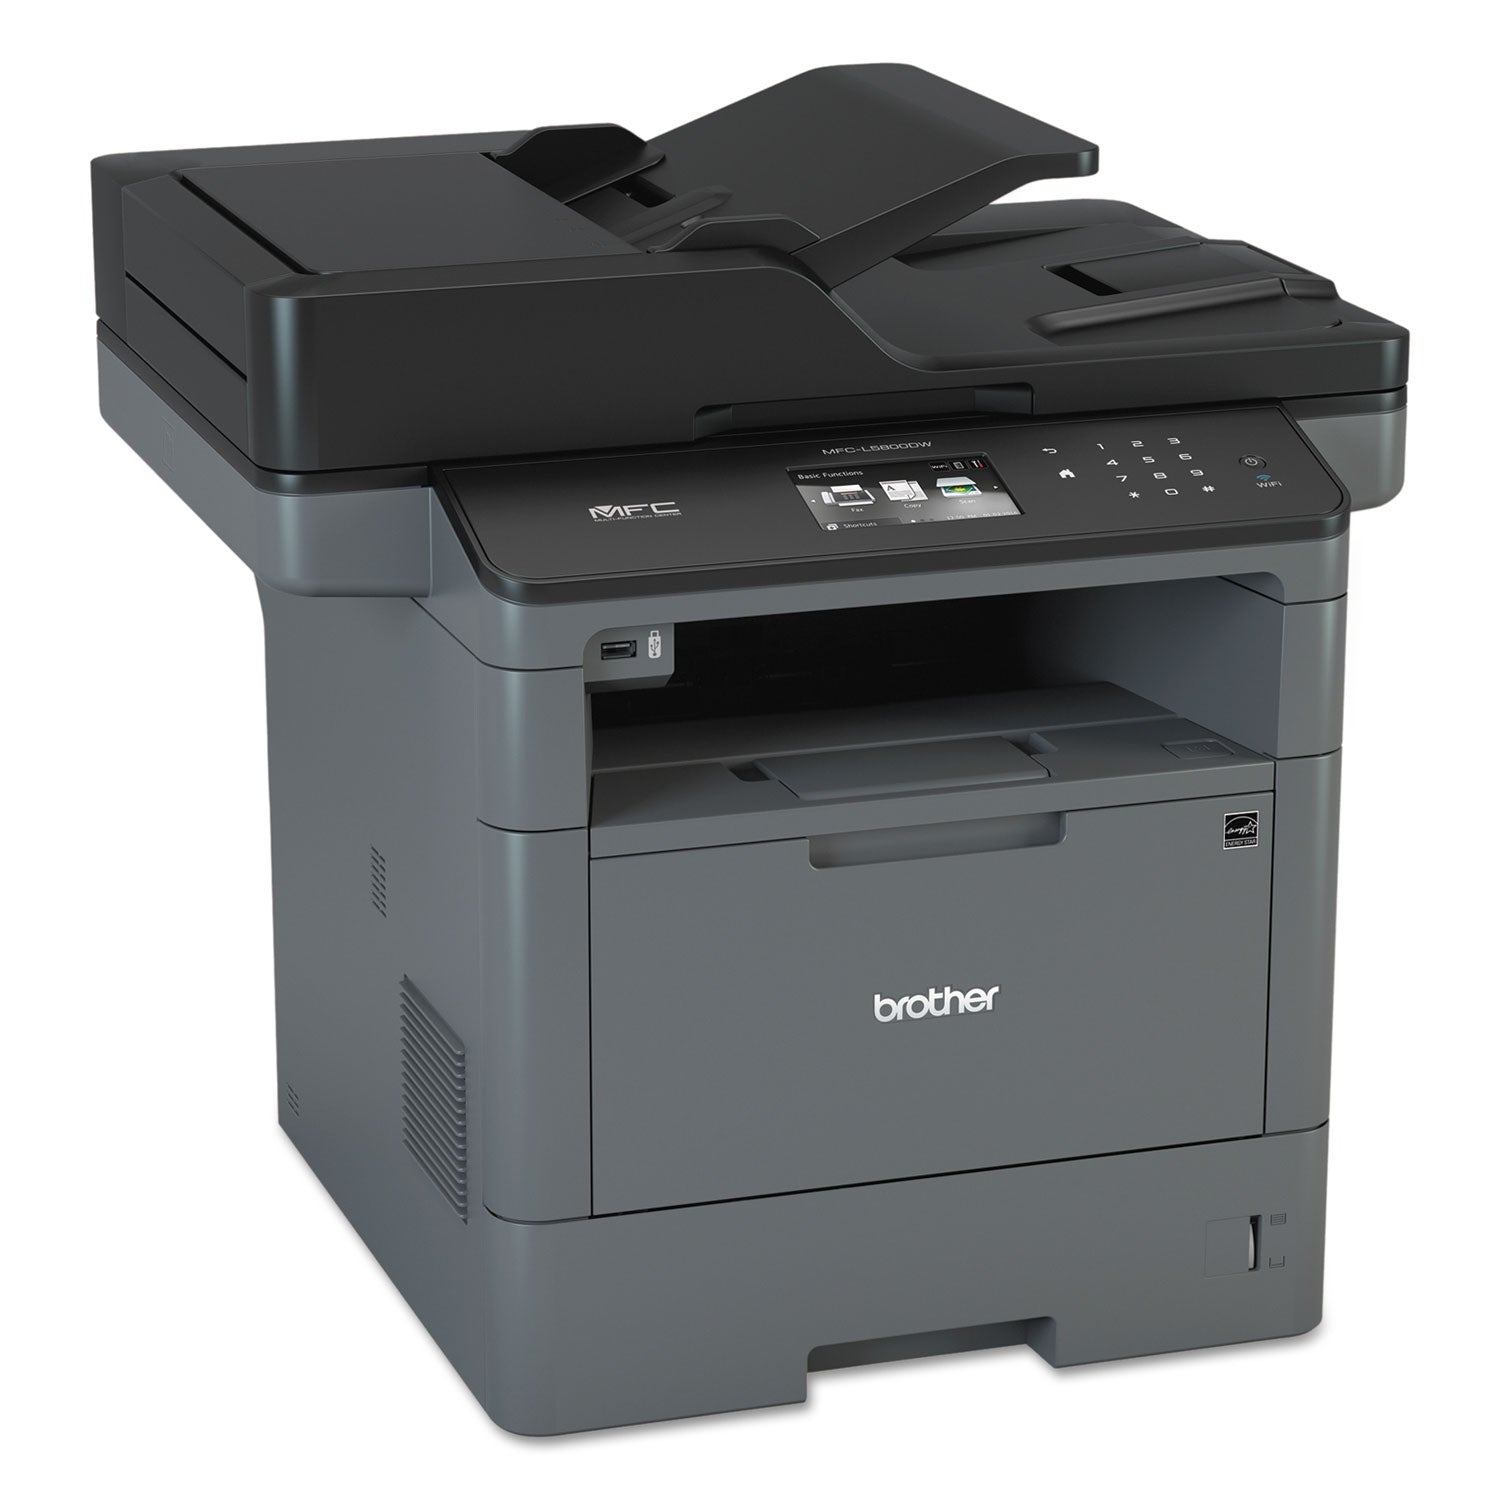 mfcl5800dw-business-laser-all-in-one-printer-with-duplex-printing-and-wireless-networking_brtmfcl5800dw - 3